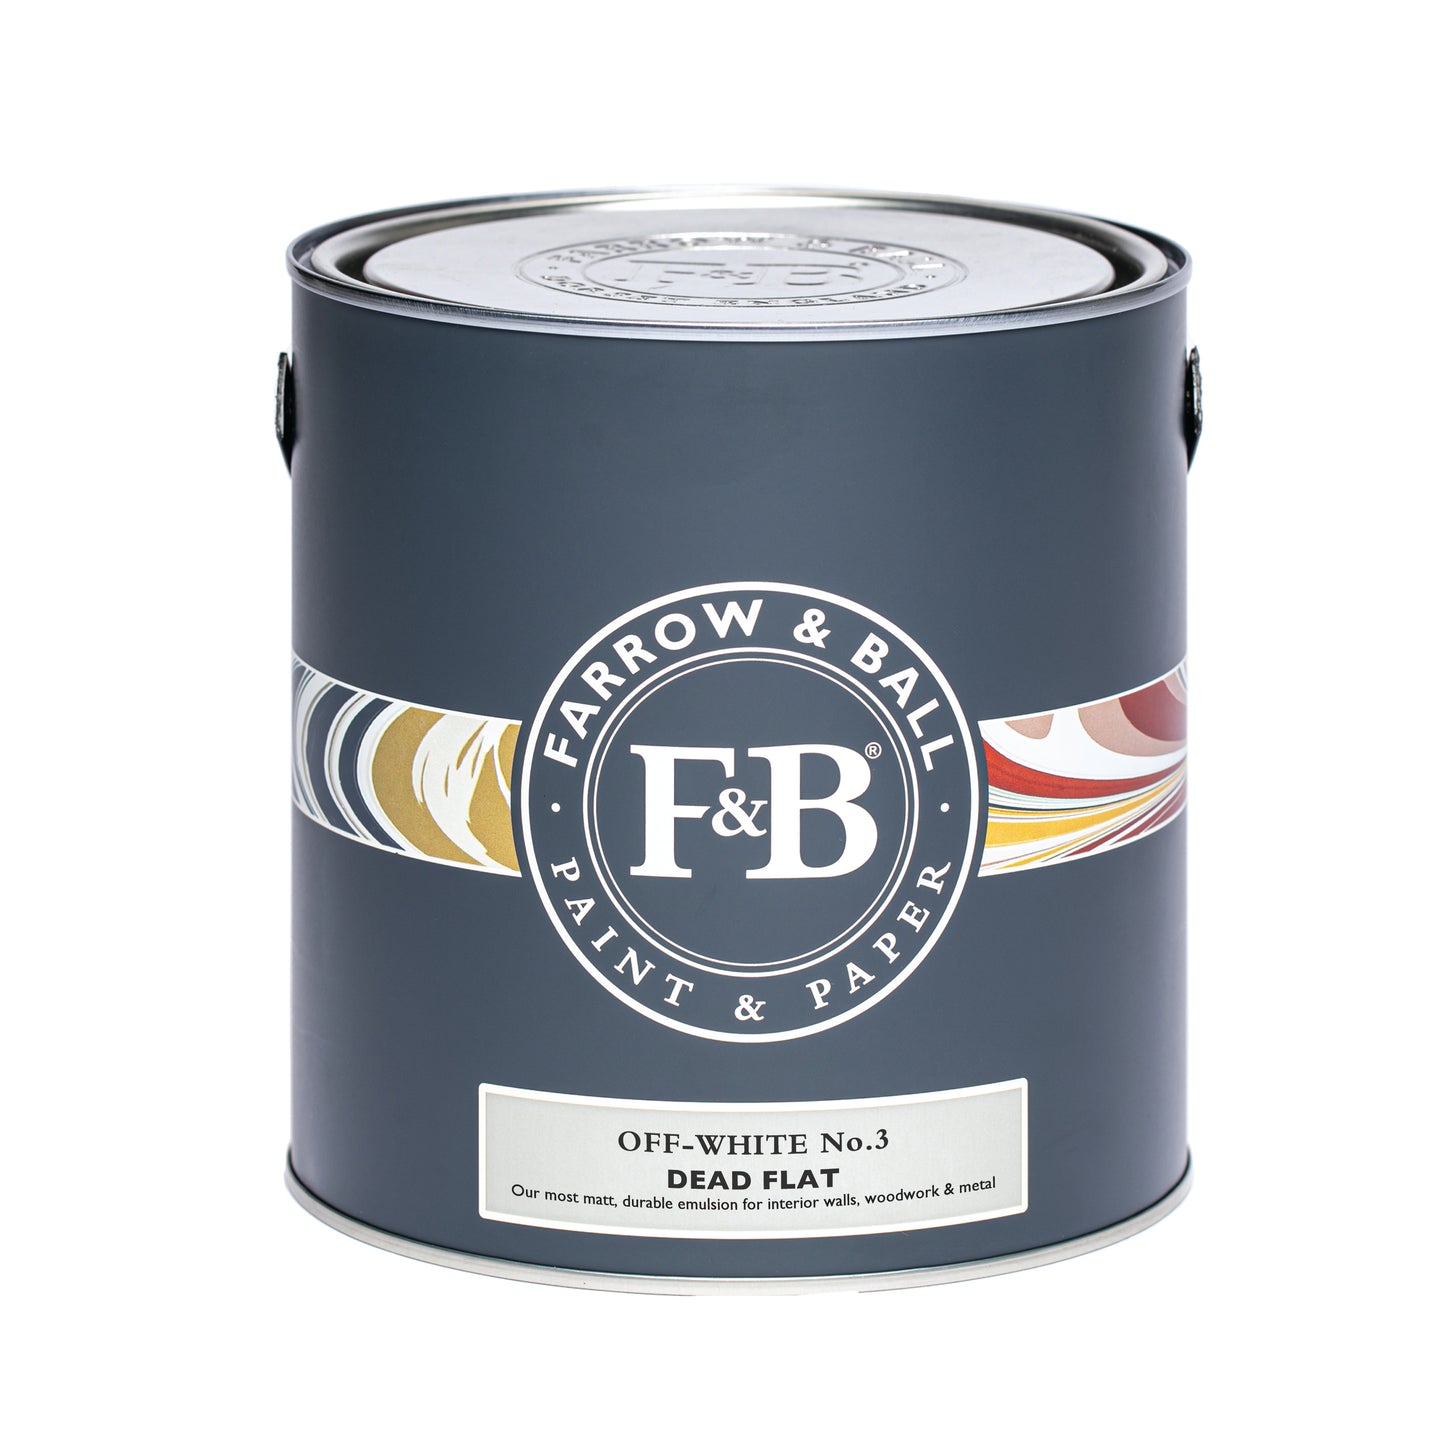 Off White 3 - Farrow and Ball - New Dead Flat